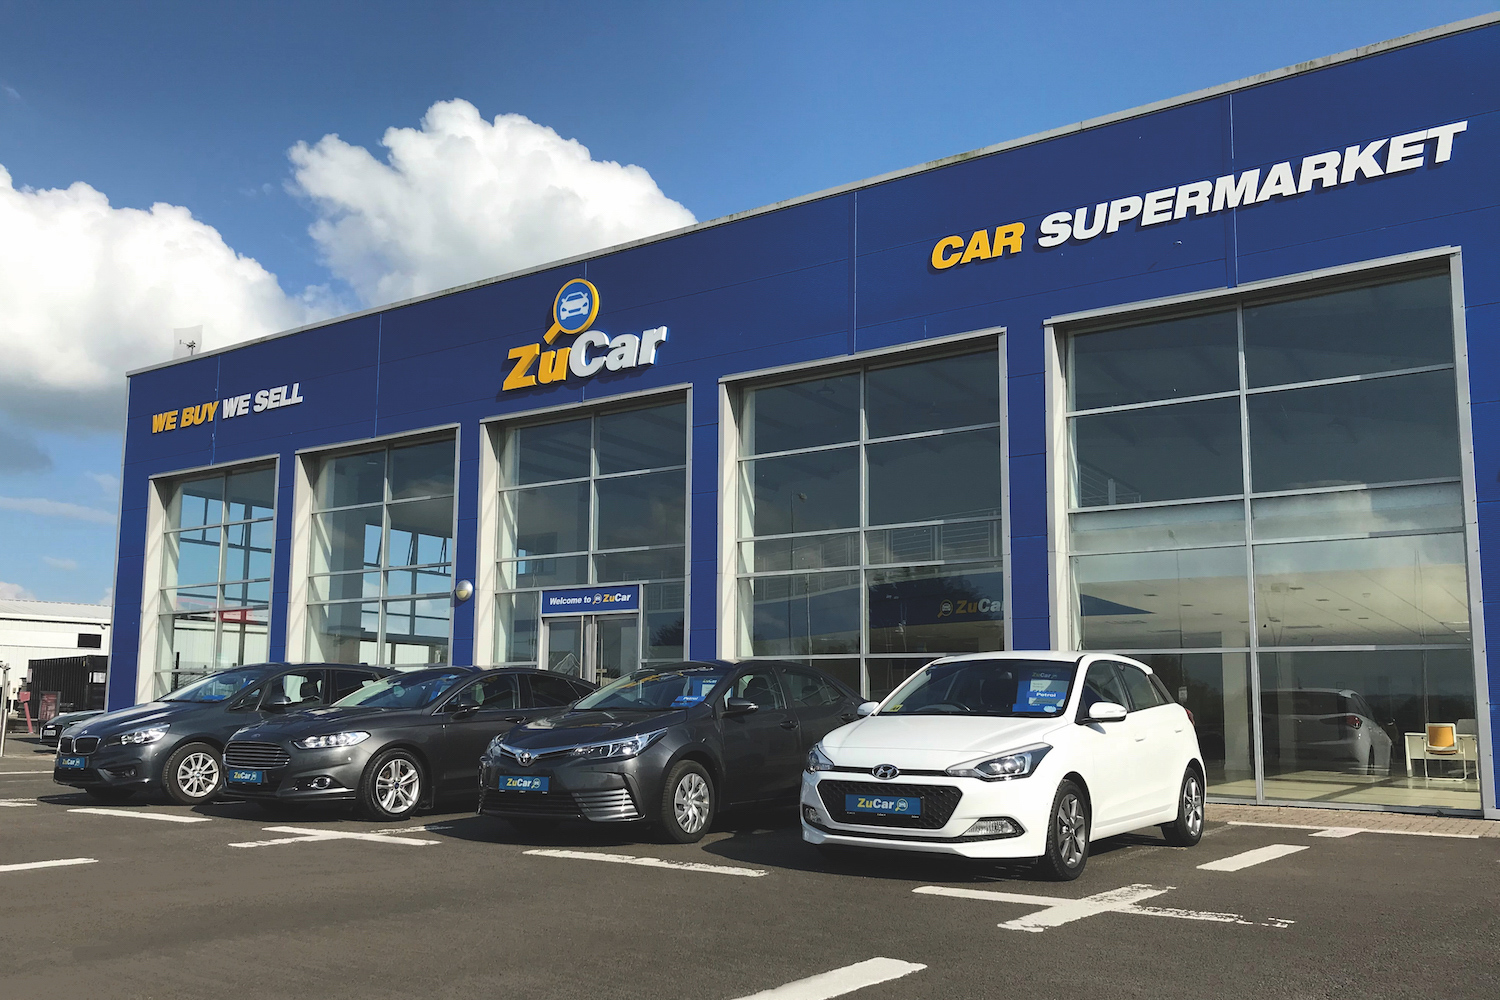 Car Industry News | ZuCar to open second car supermarket in Limerick | CompleteCar.ie